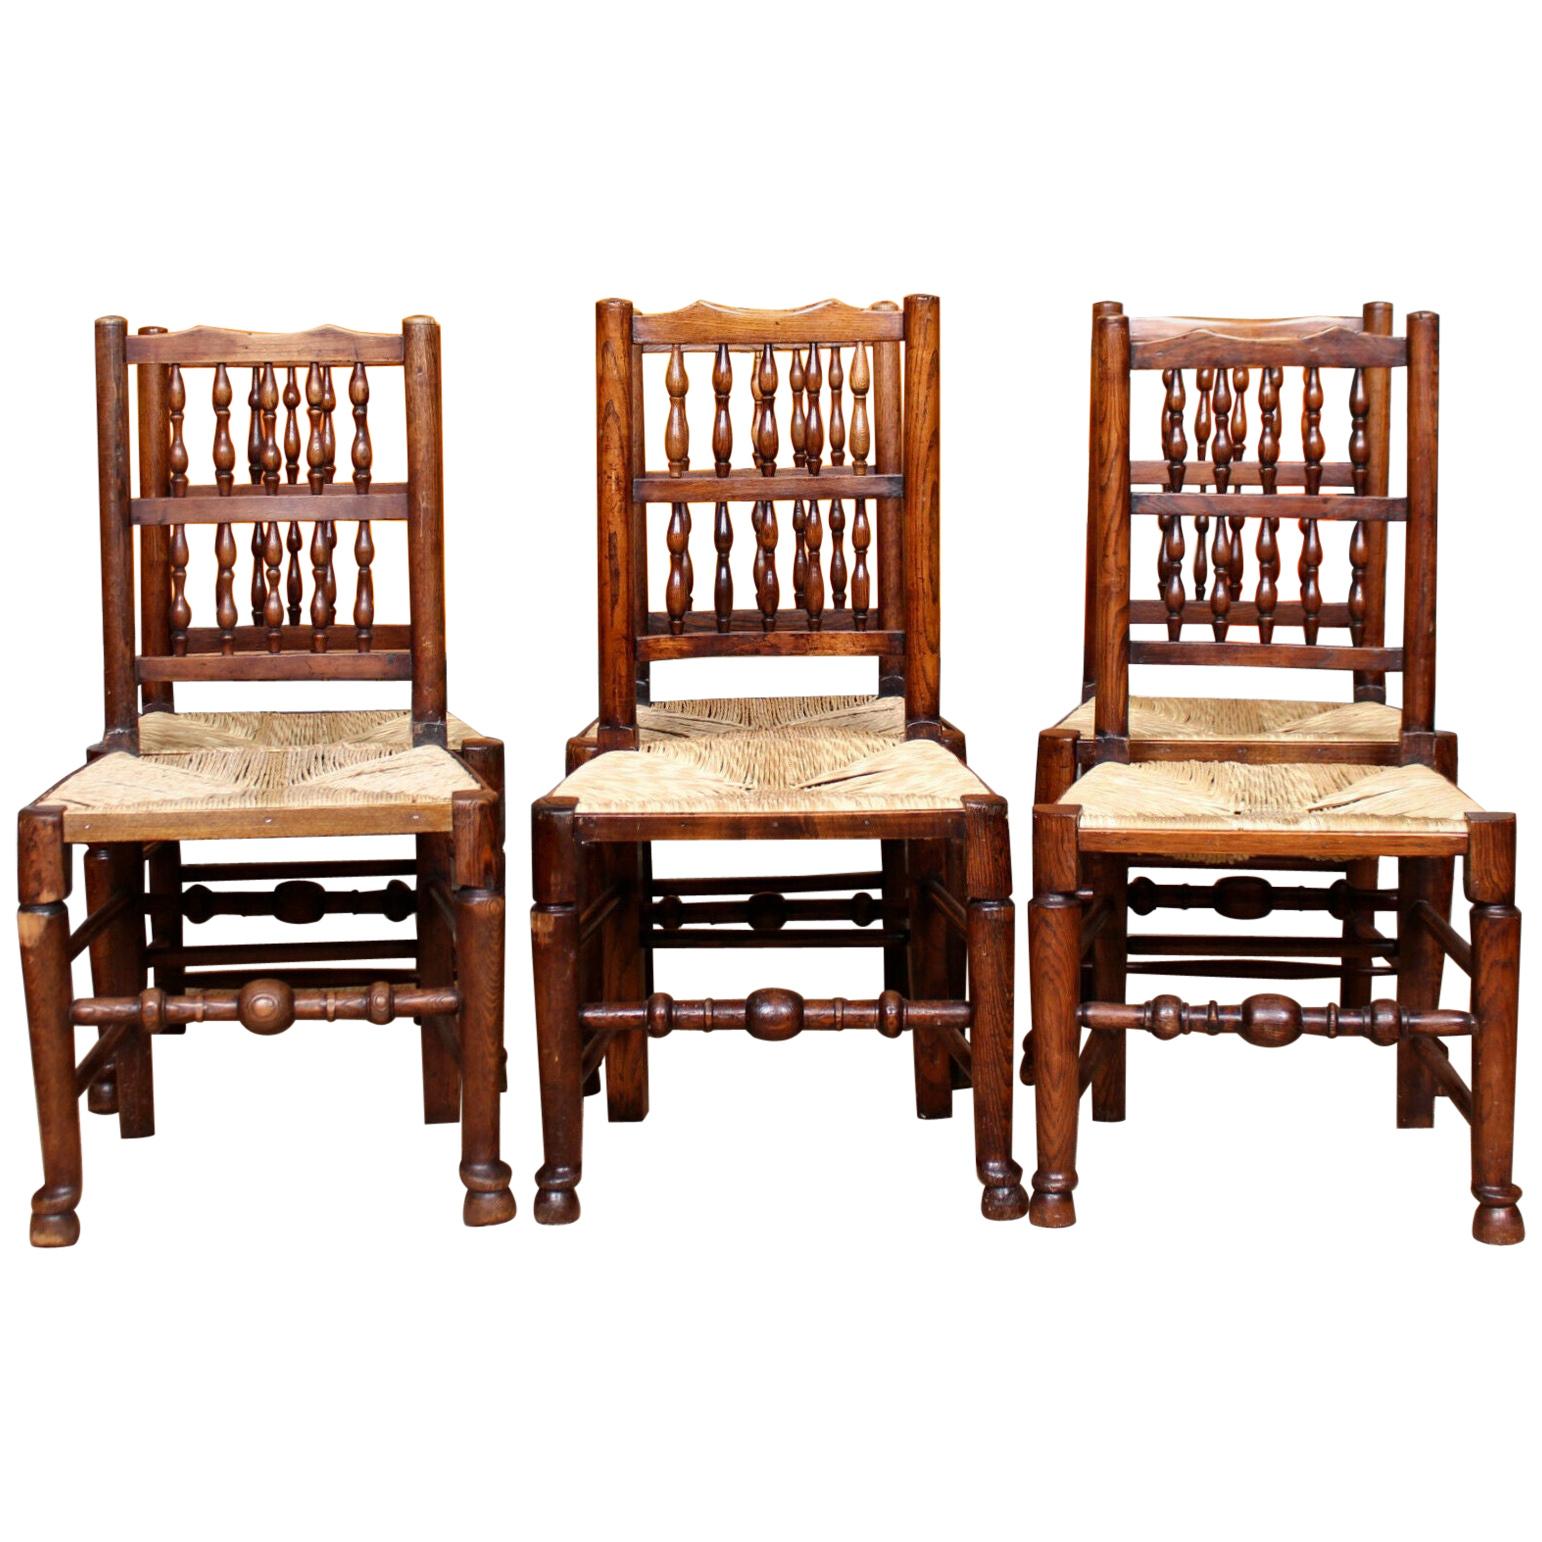 6 Georgian Dining Chairs Country Antique George IV Ash Rushwork Seats For Sale